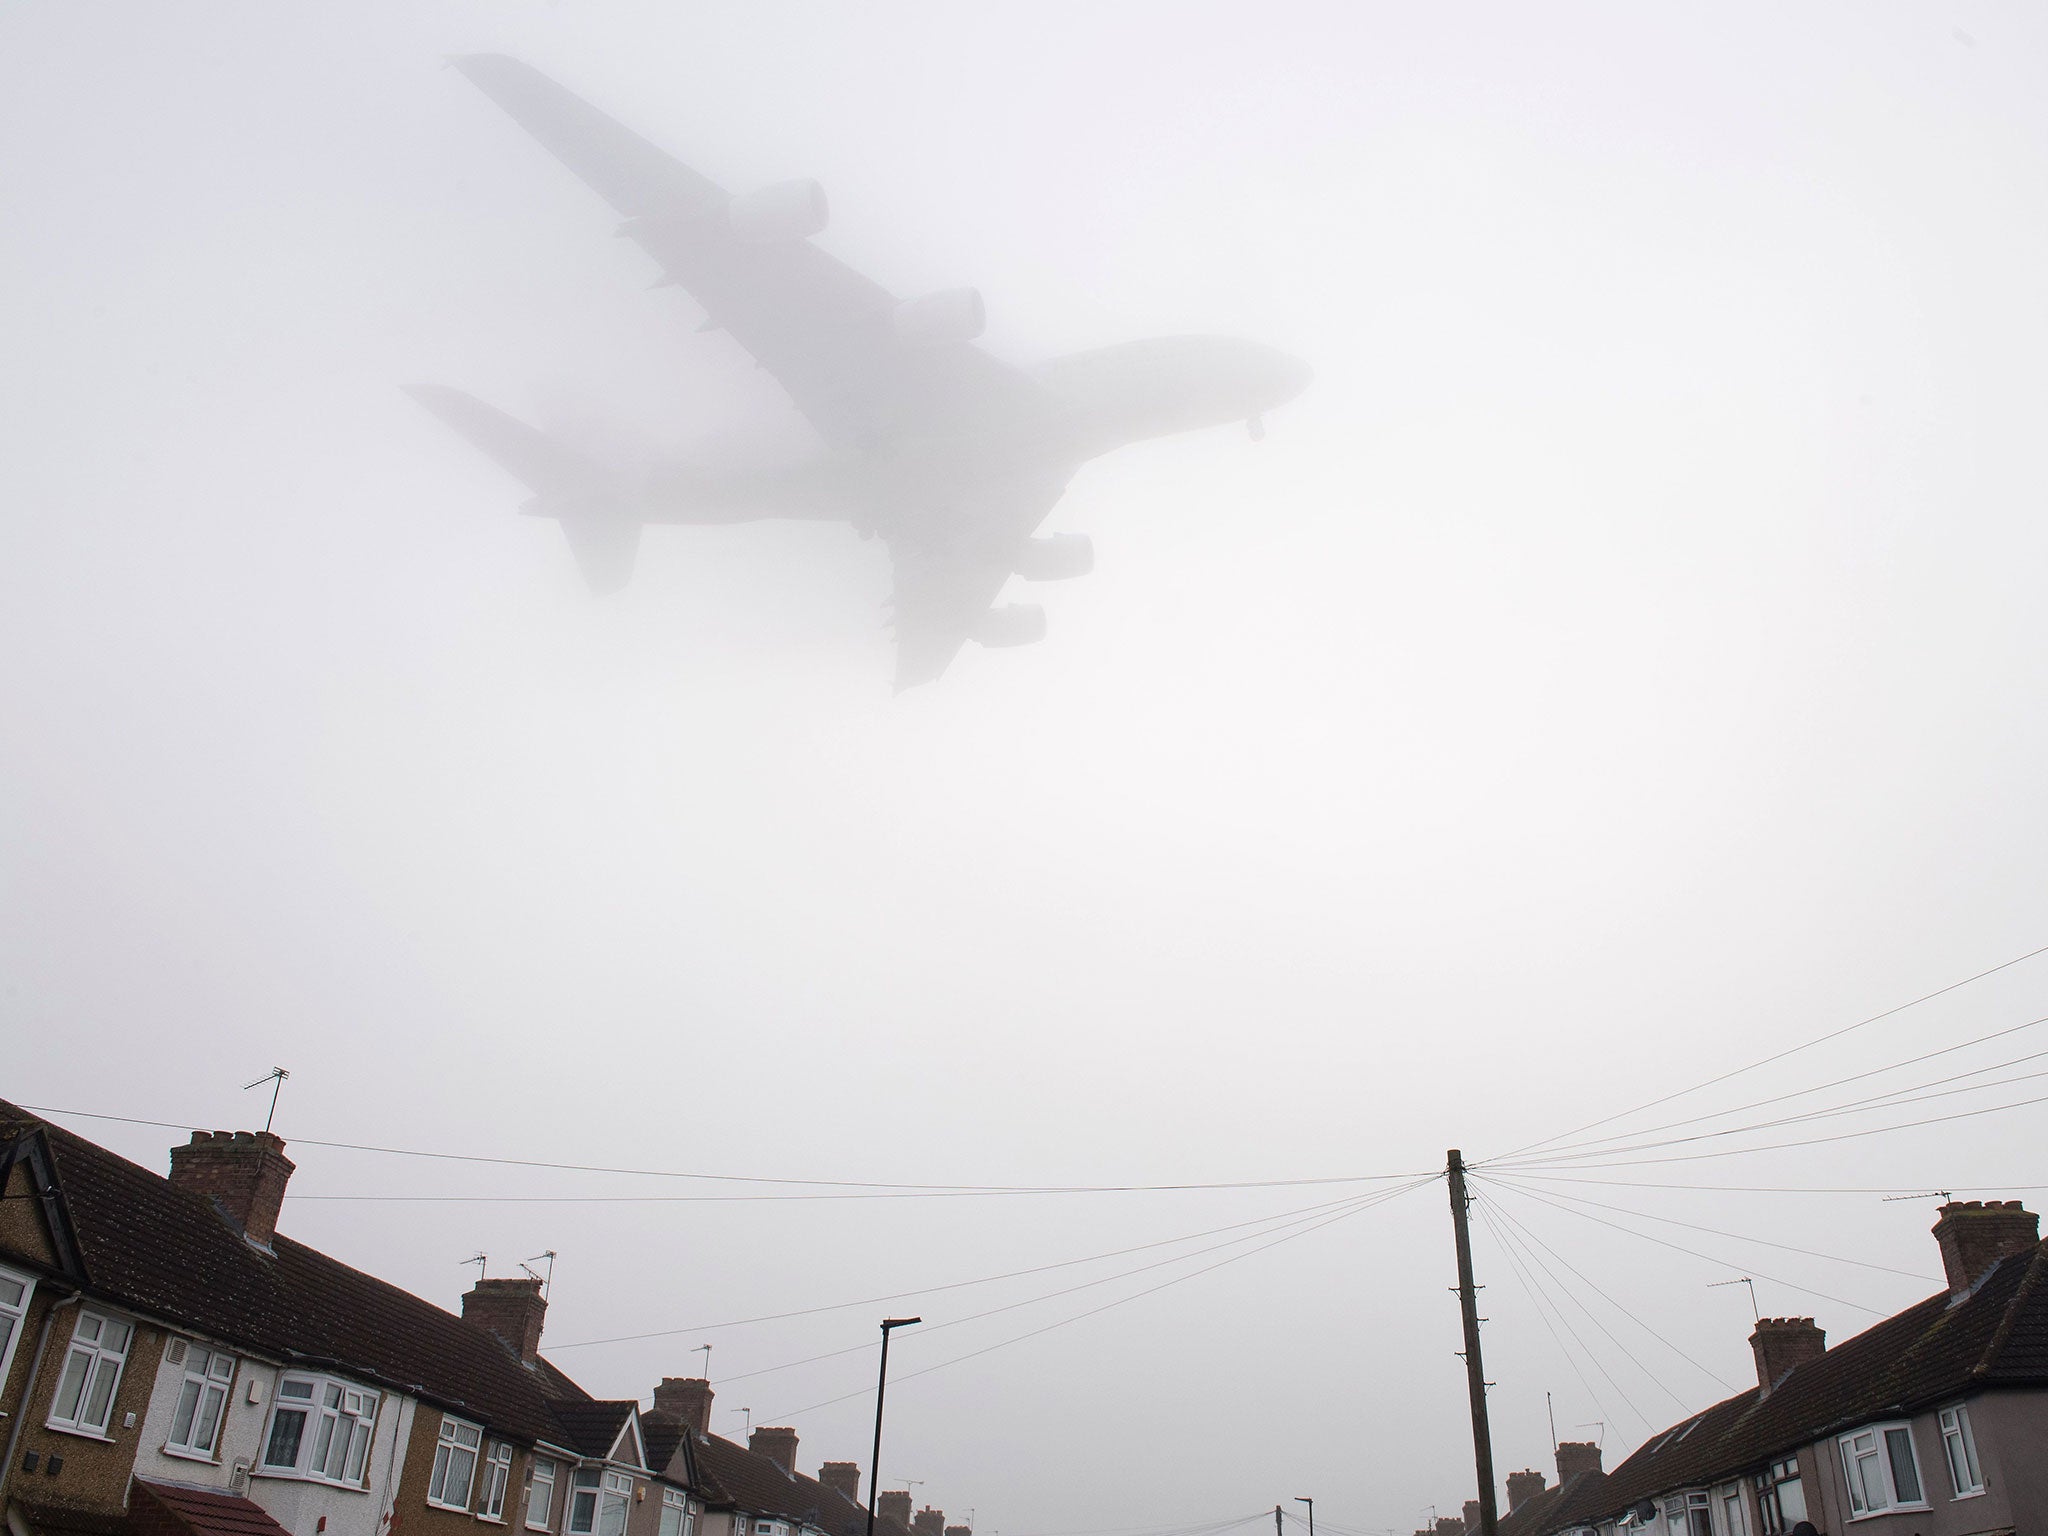 Planes have had to deal with heavy fog when seeking to land or take-off at Heathrow